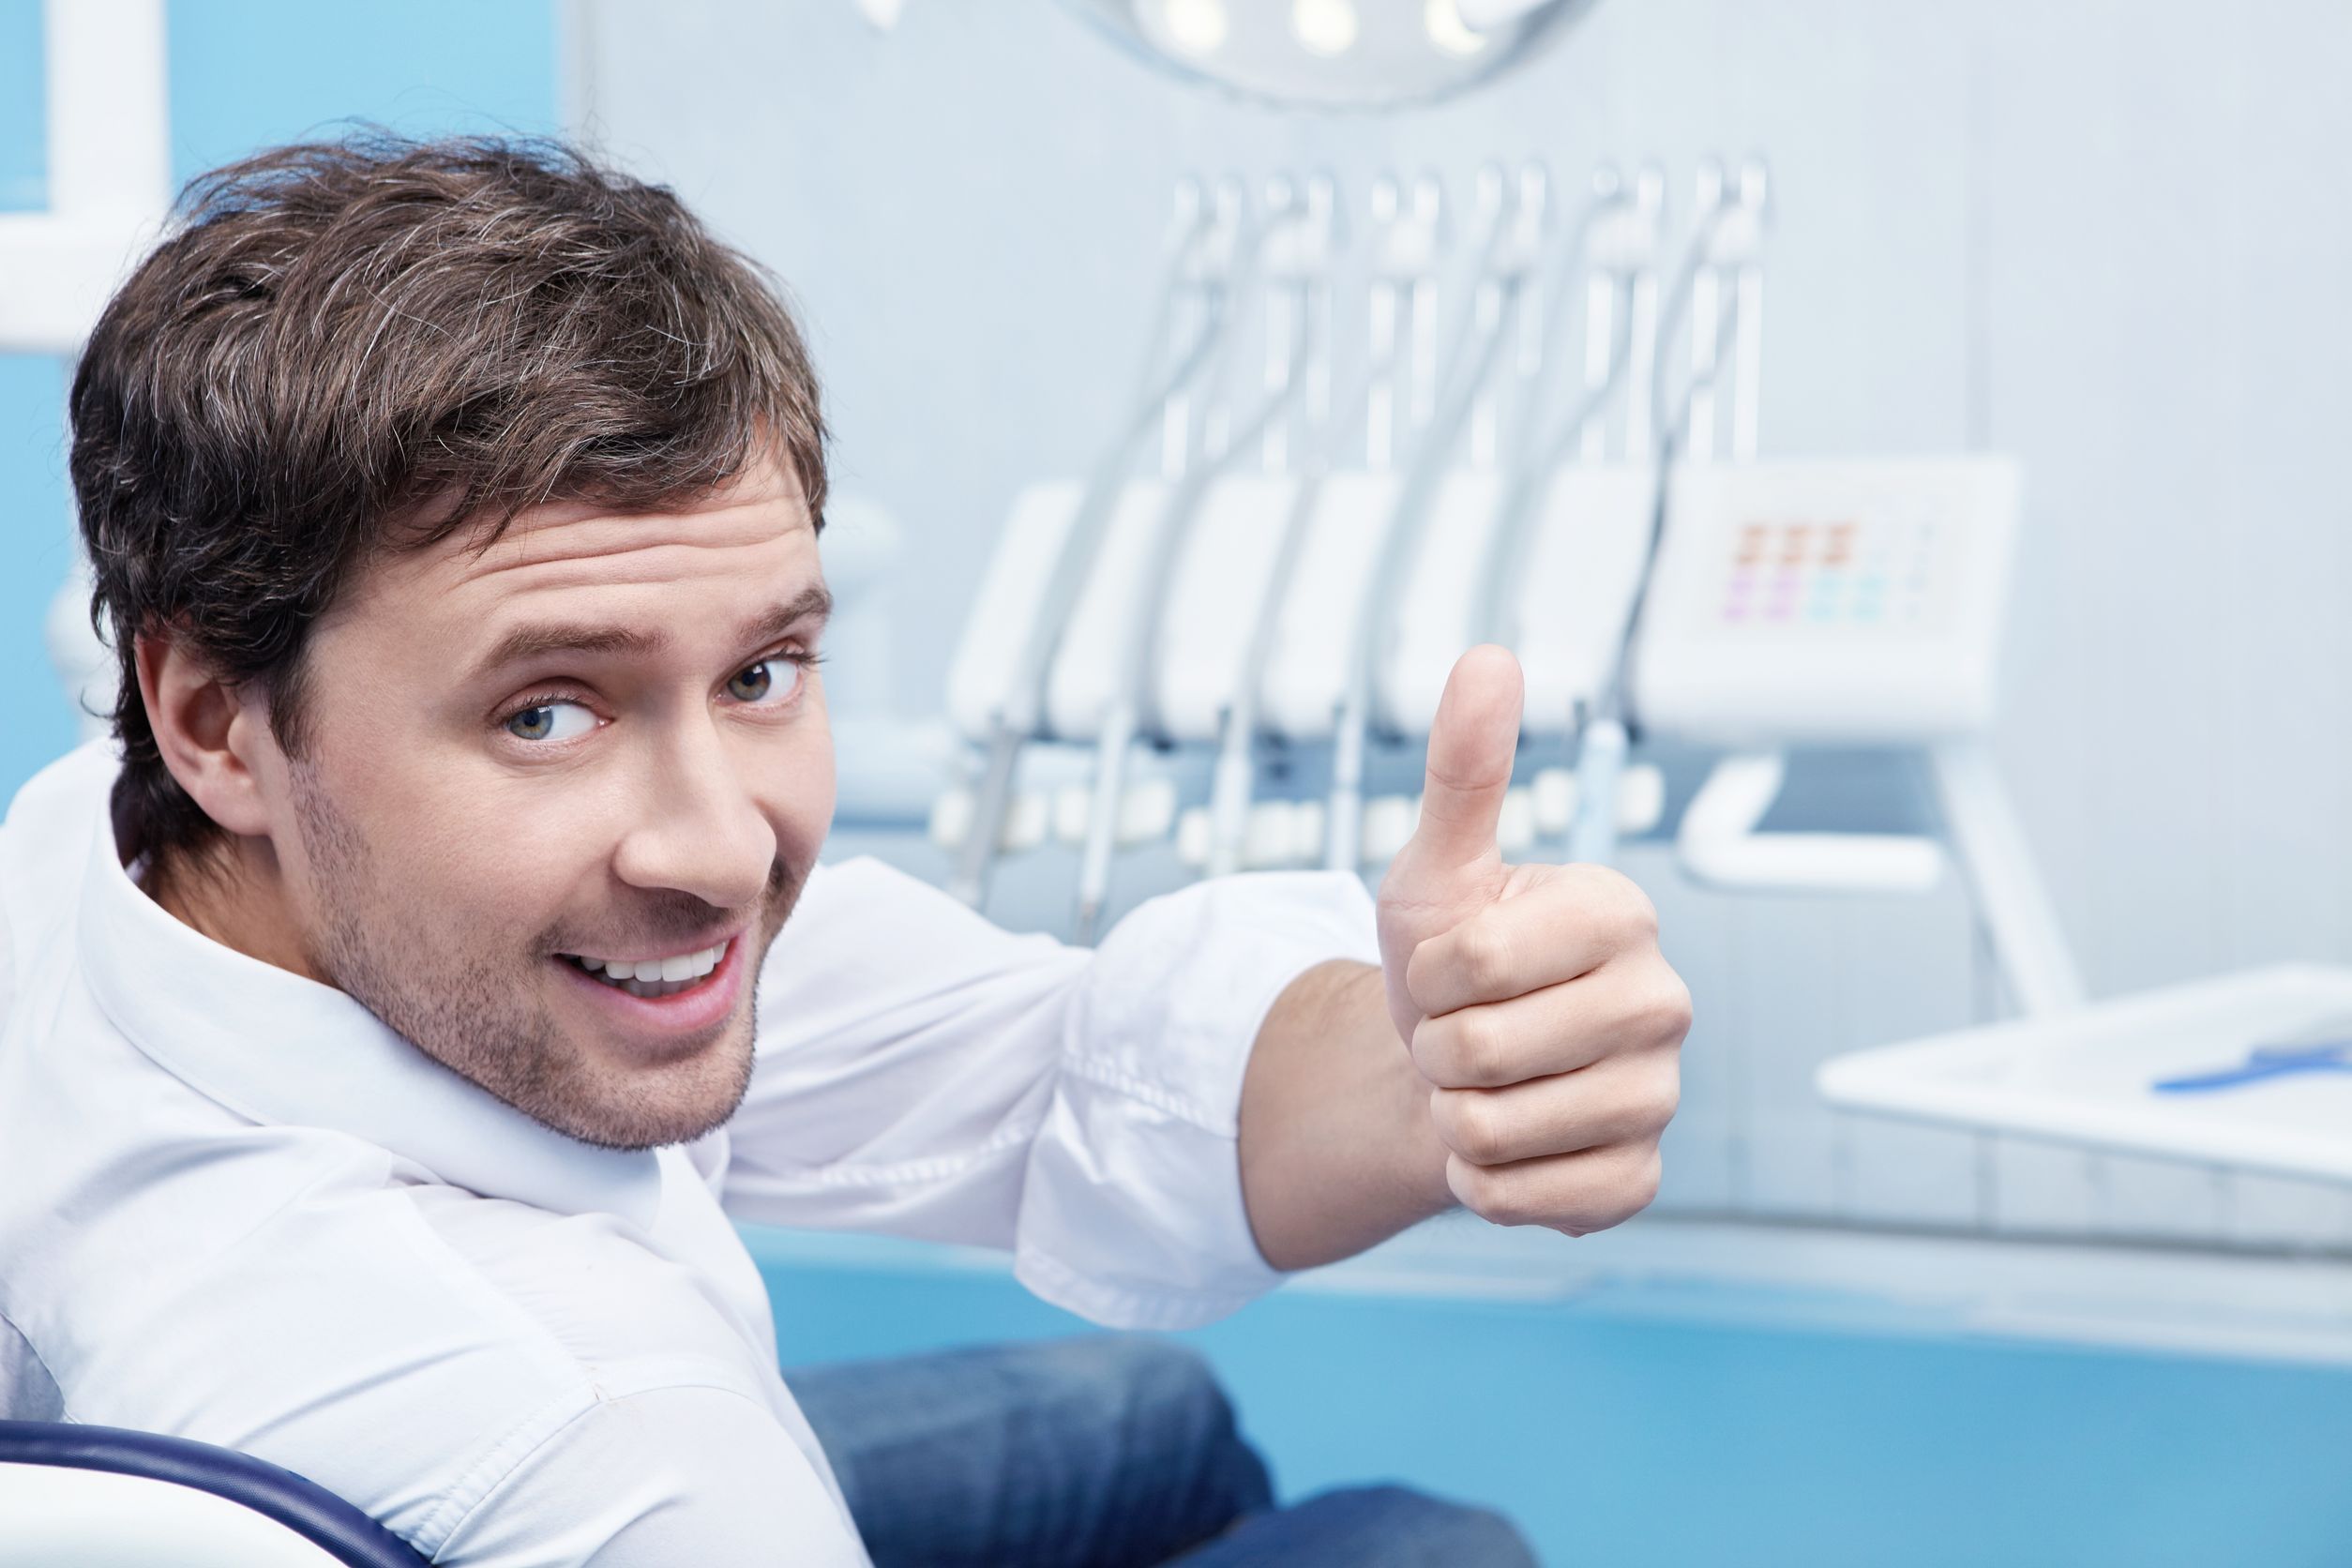 Where Can I Find A Plainview Sedation Dentist?